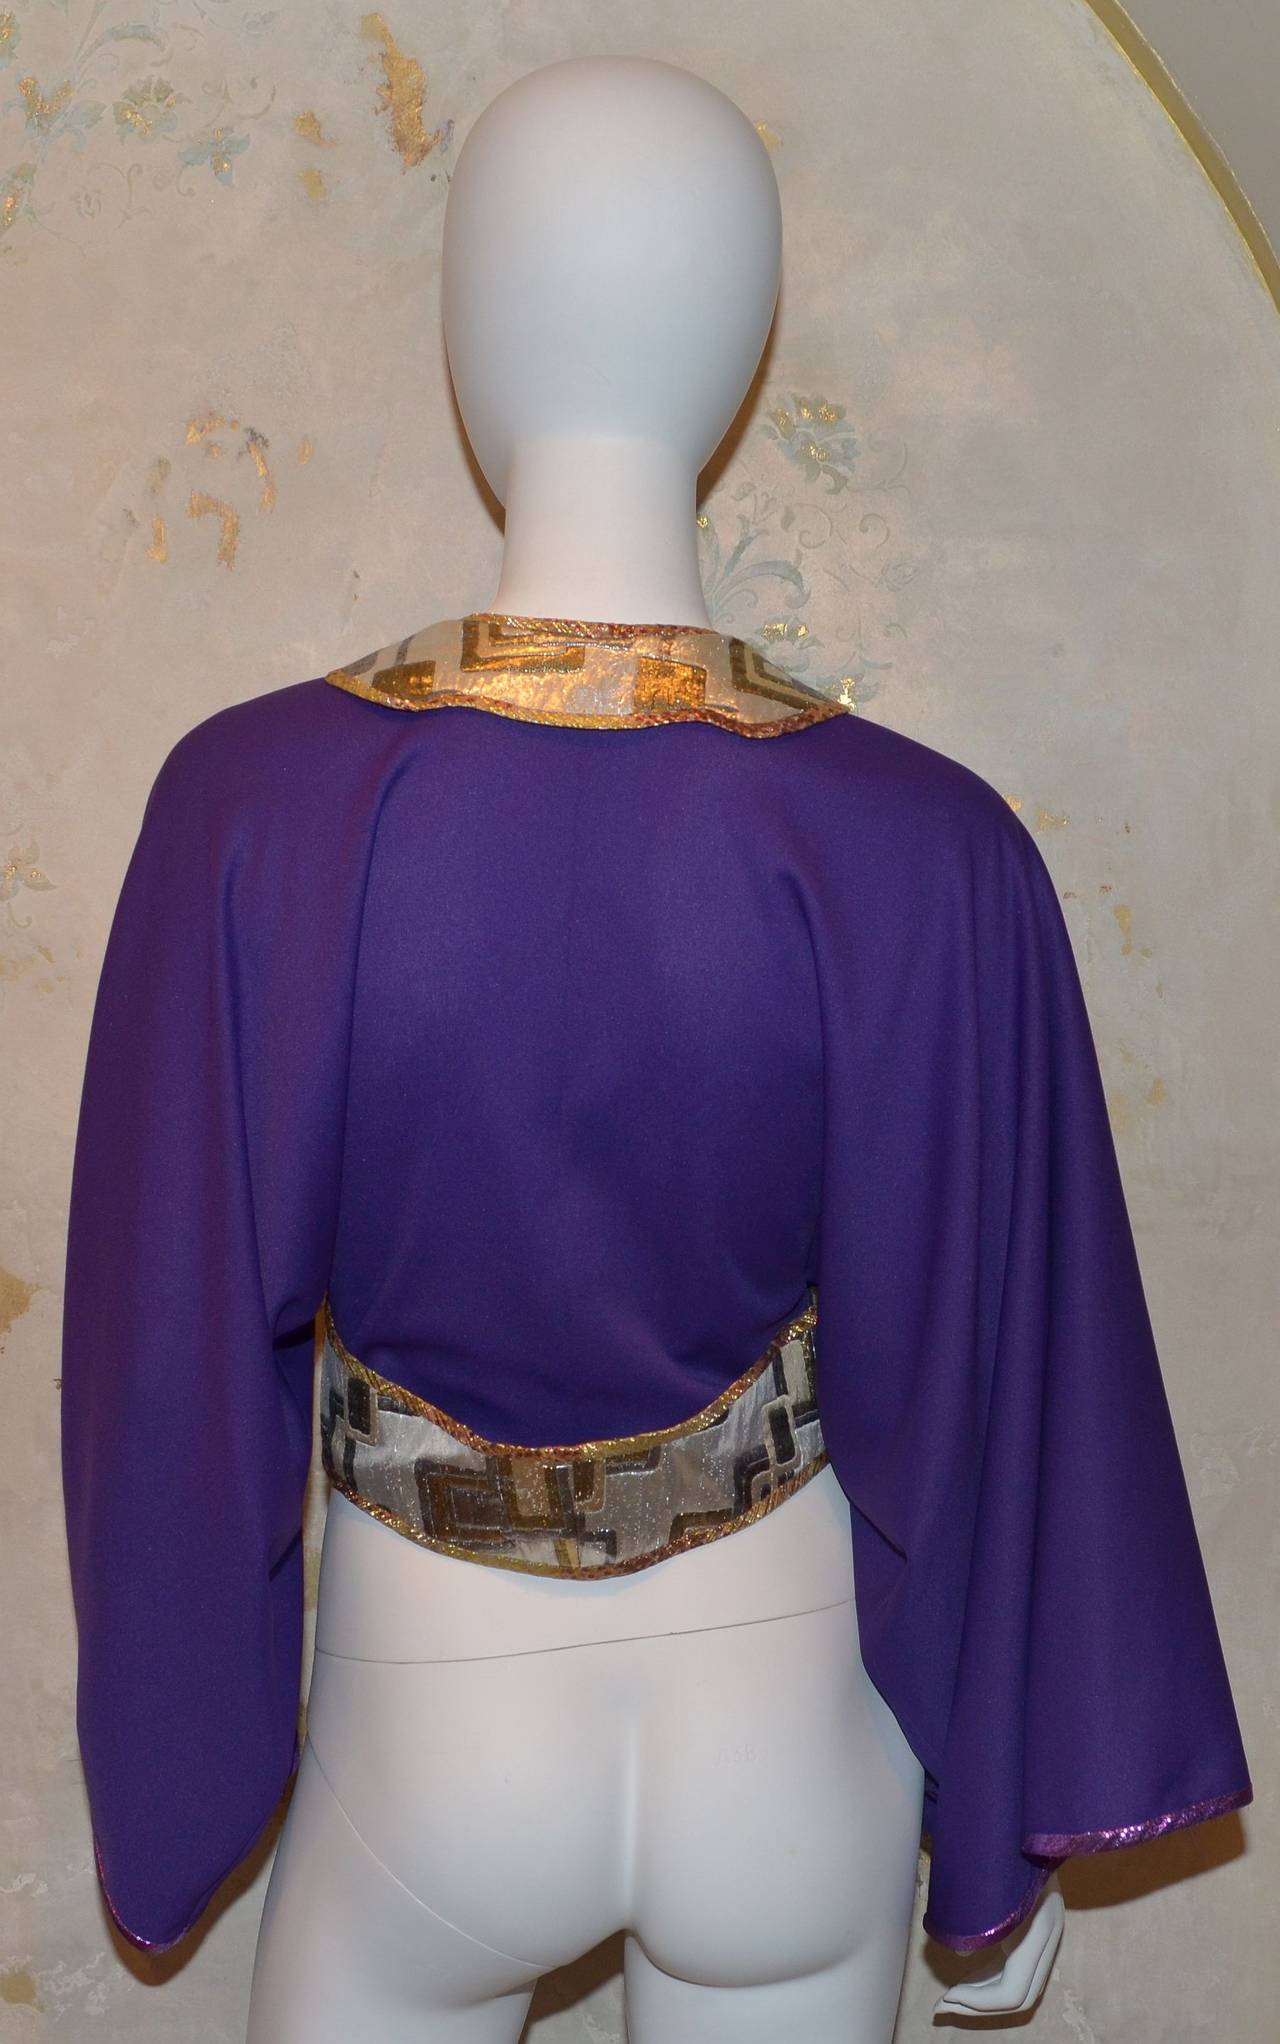 Handmade Kaisik Wong jersey kimono jacket has a metal zipper front closure, silver, gold, and multi-colored brocade waistband and collar.

Kaisik Wong of San Francisco was the pioneer of Wearable Art. His creations were exquisite and all handmade